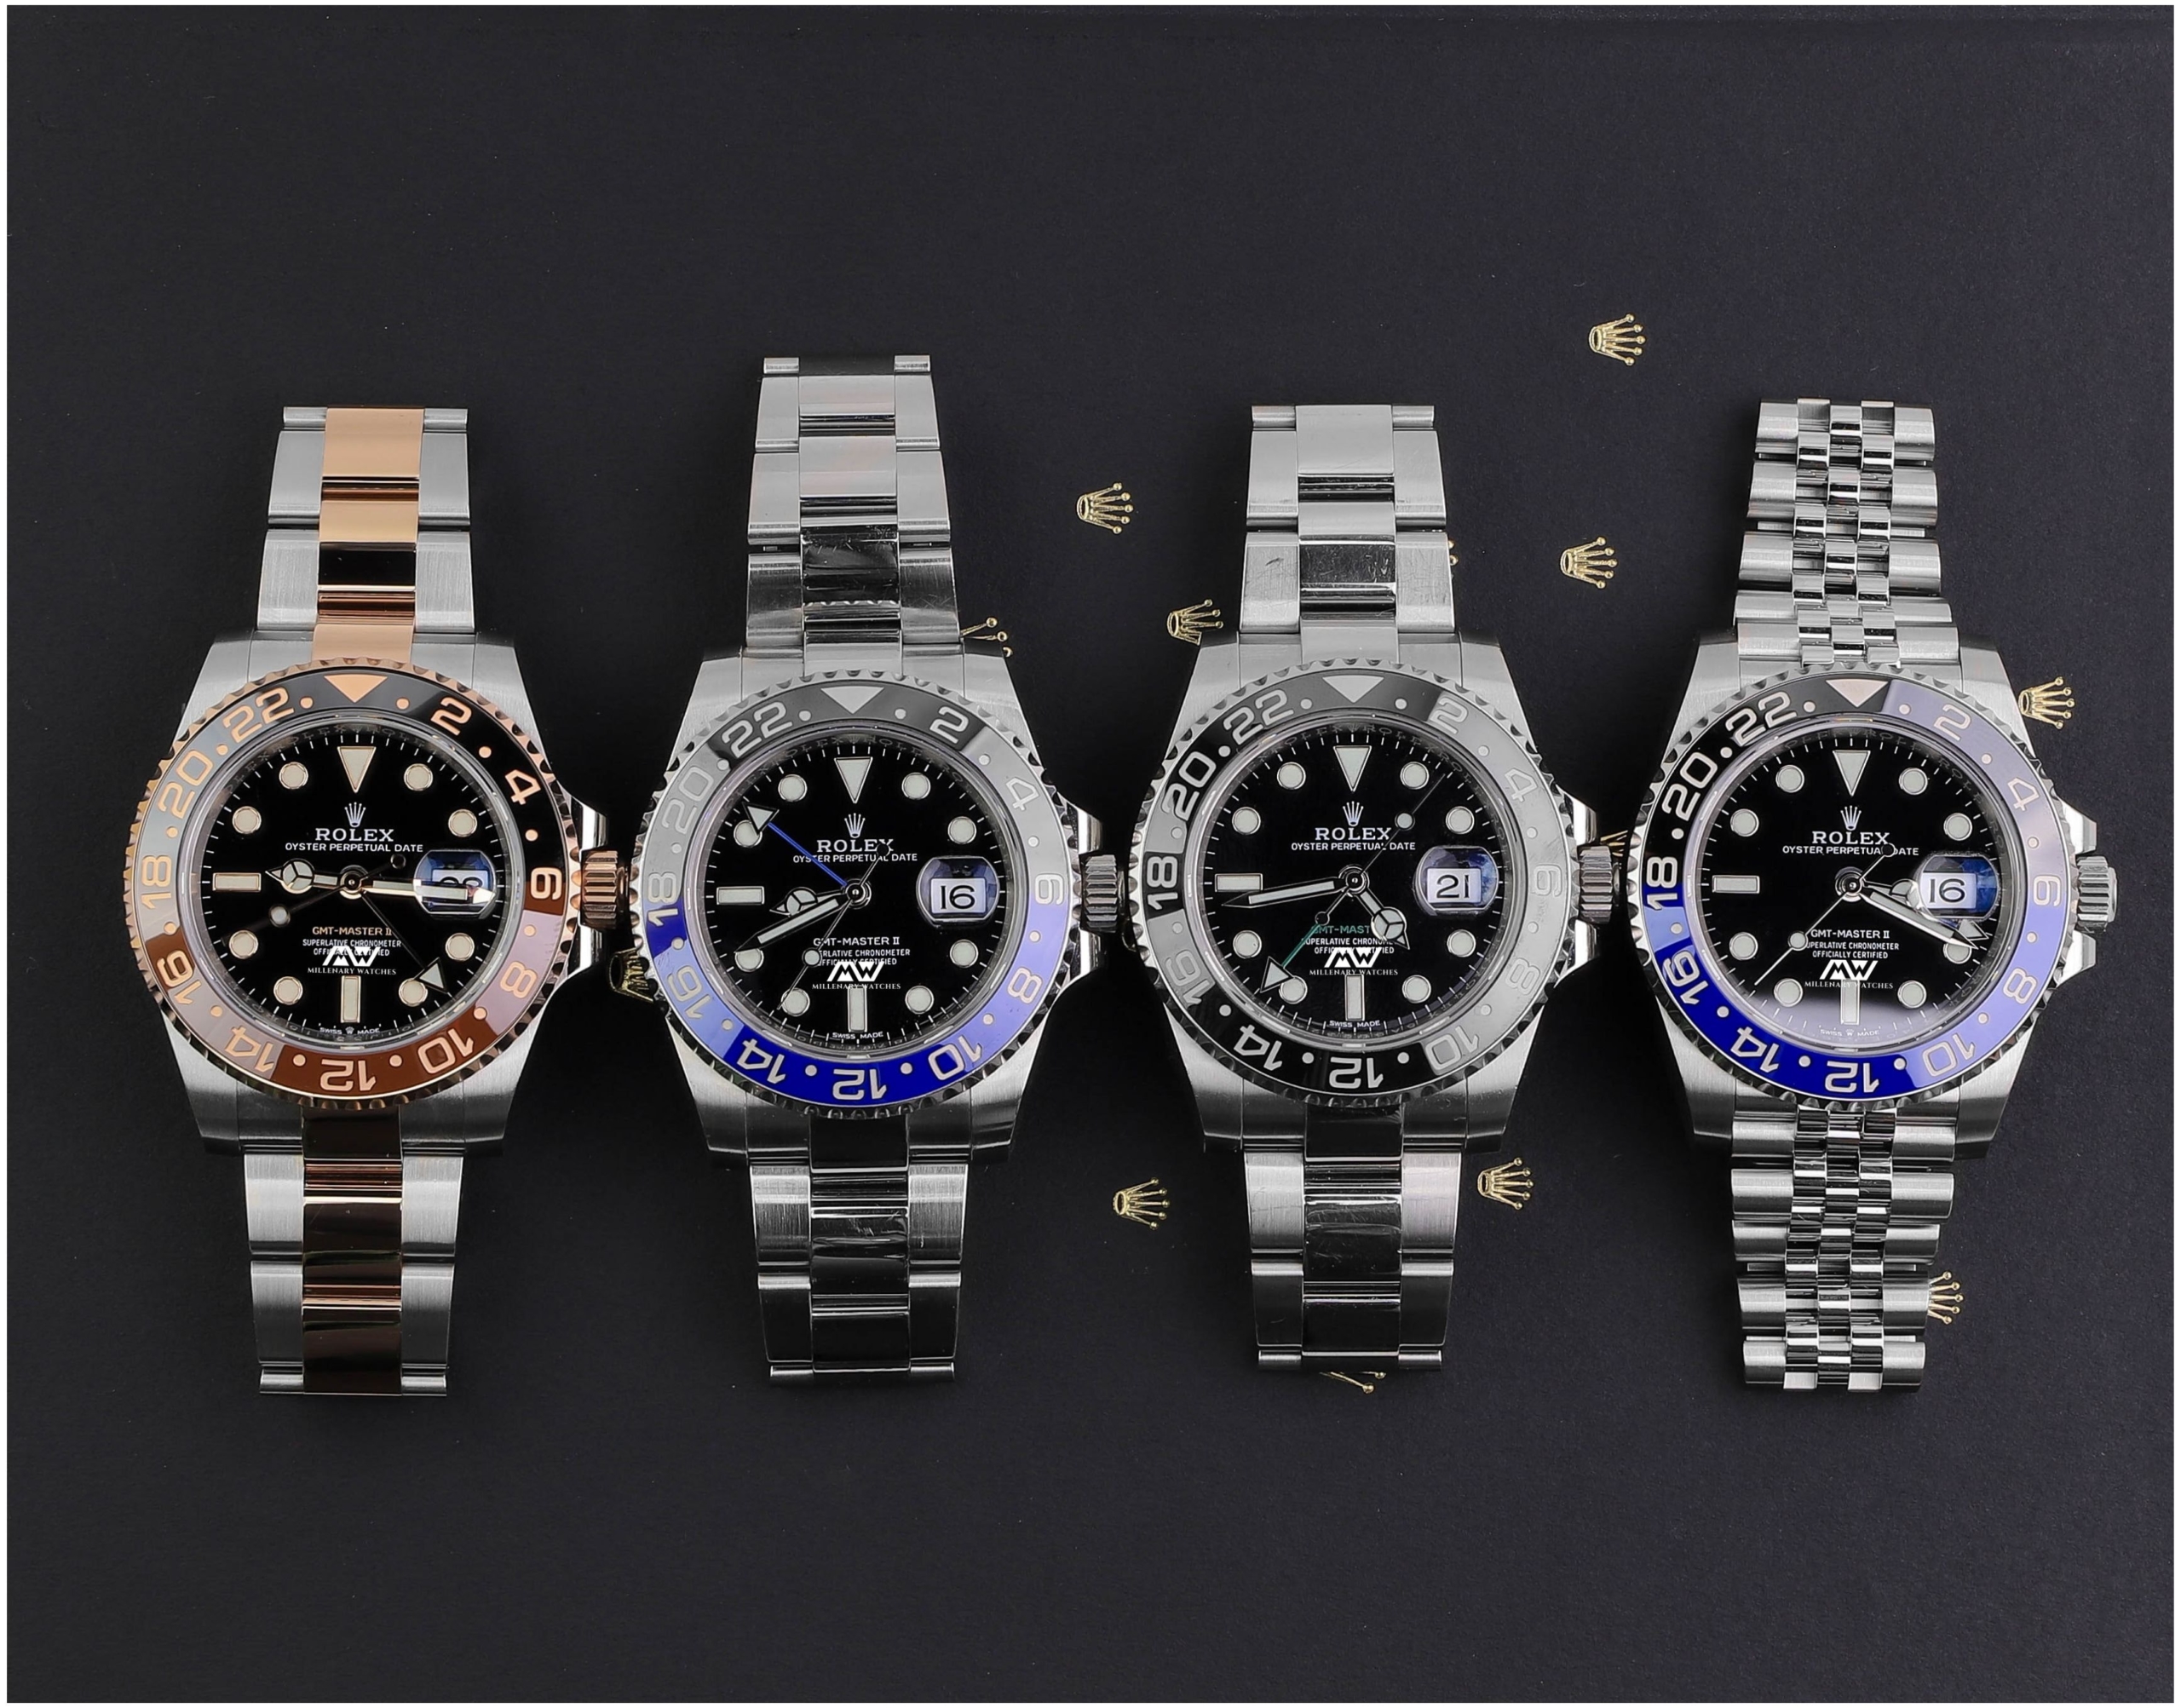 Group of 4 watches - Product Photography Styles